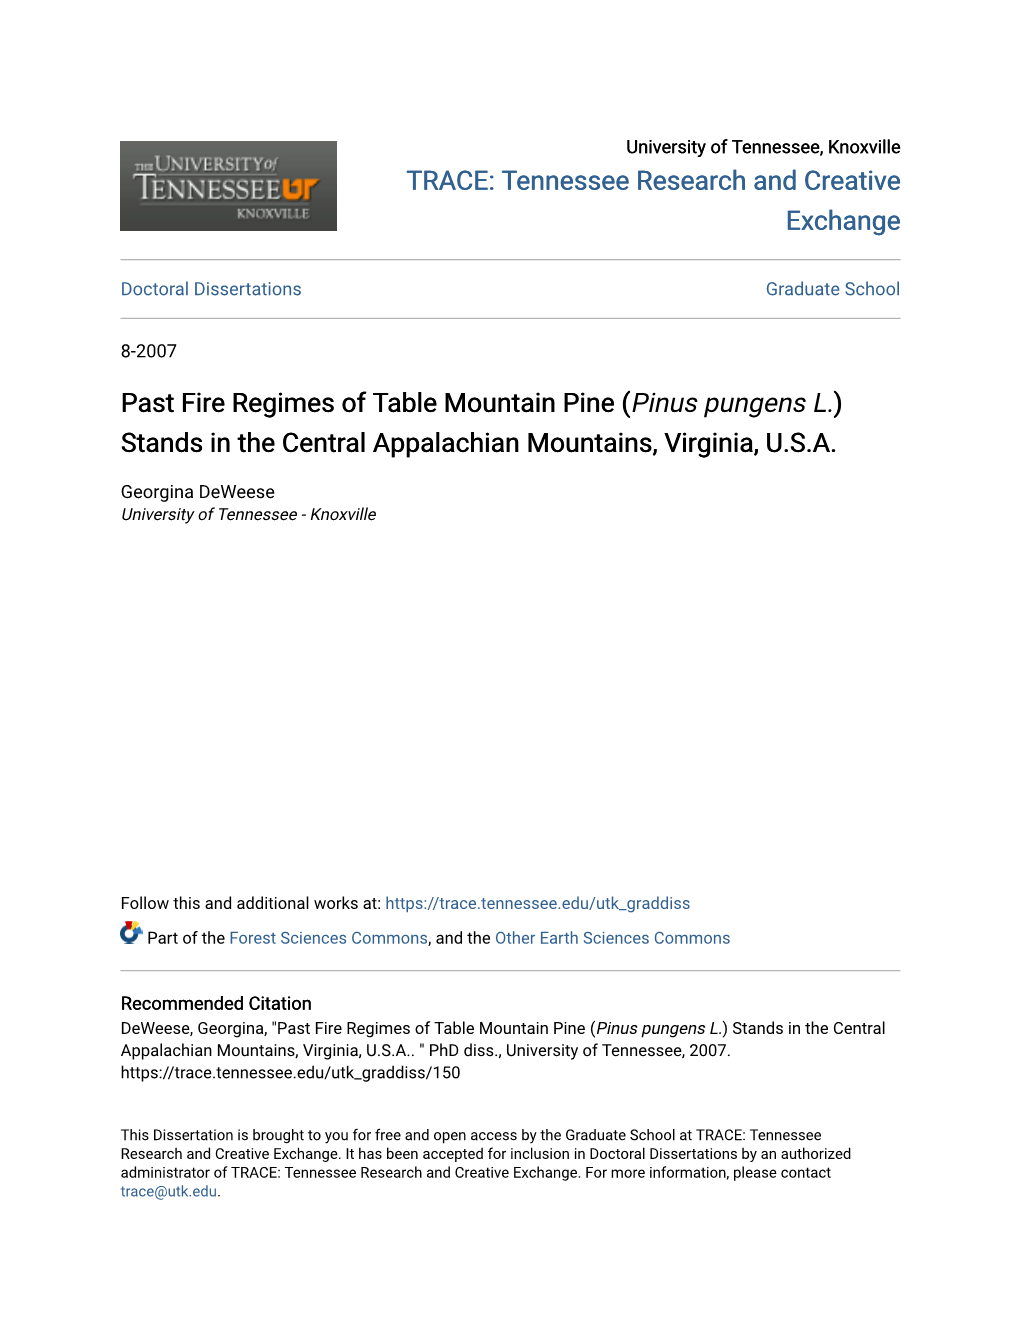 Past Fire Regimes of Table Mountain Pine (Pinus Pungens L.) Stands in the Central Appalachian Mountains, Virginia, U.S.A